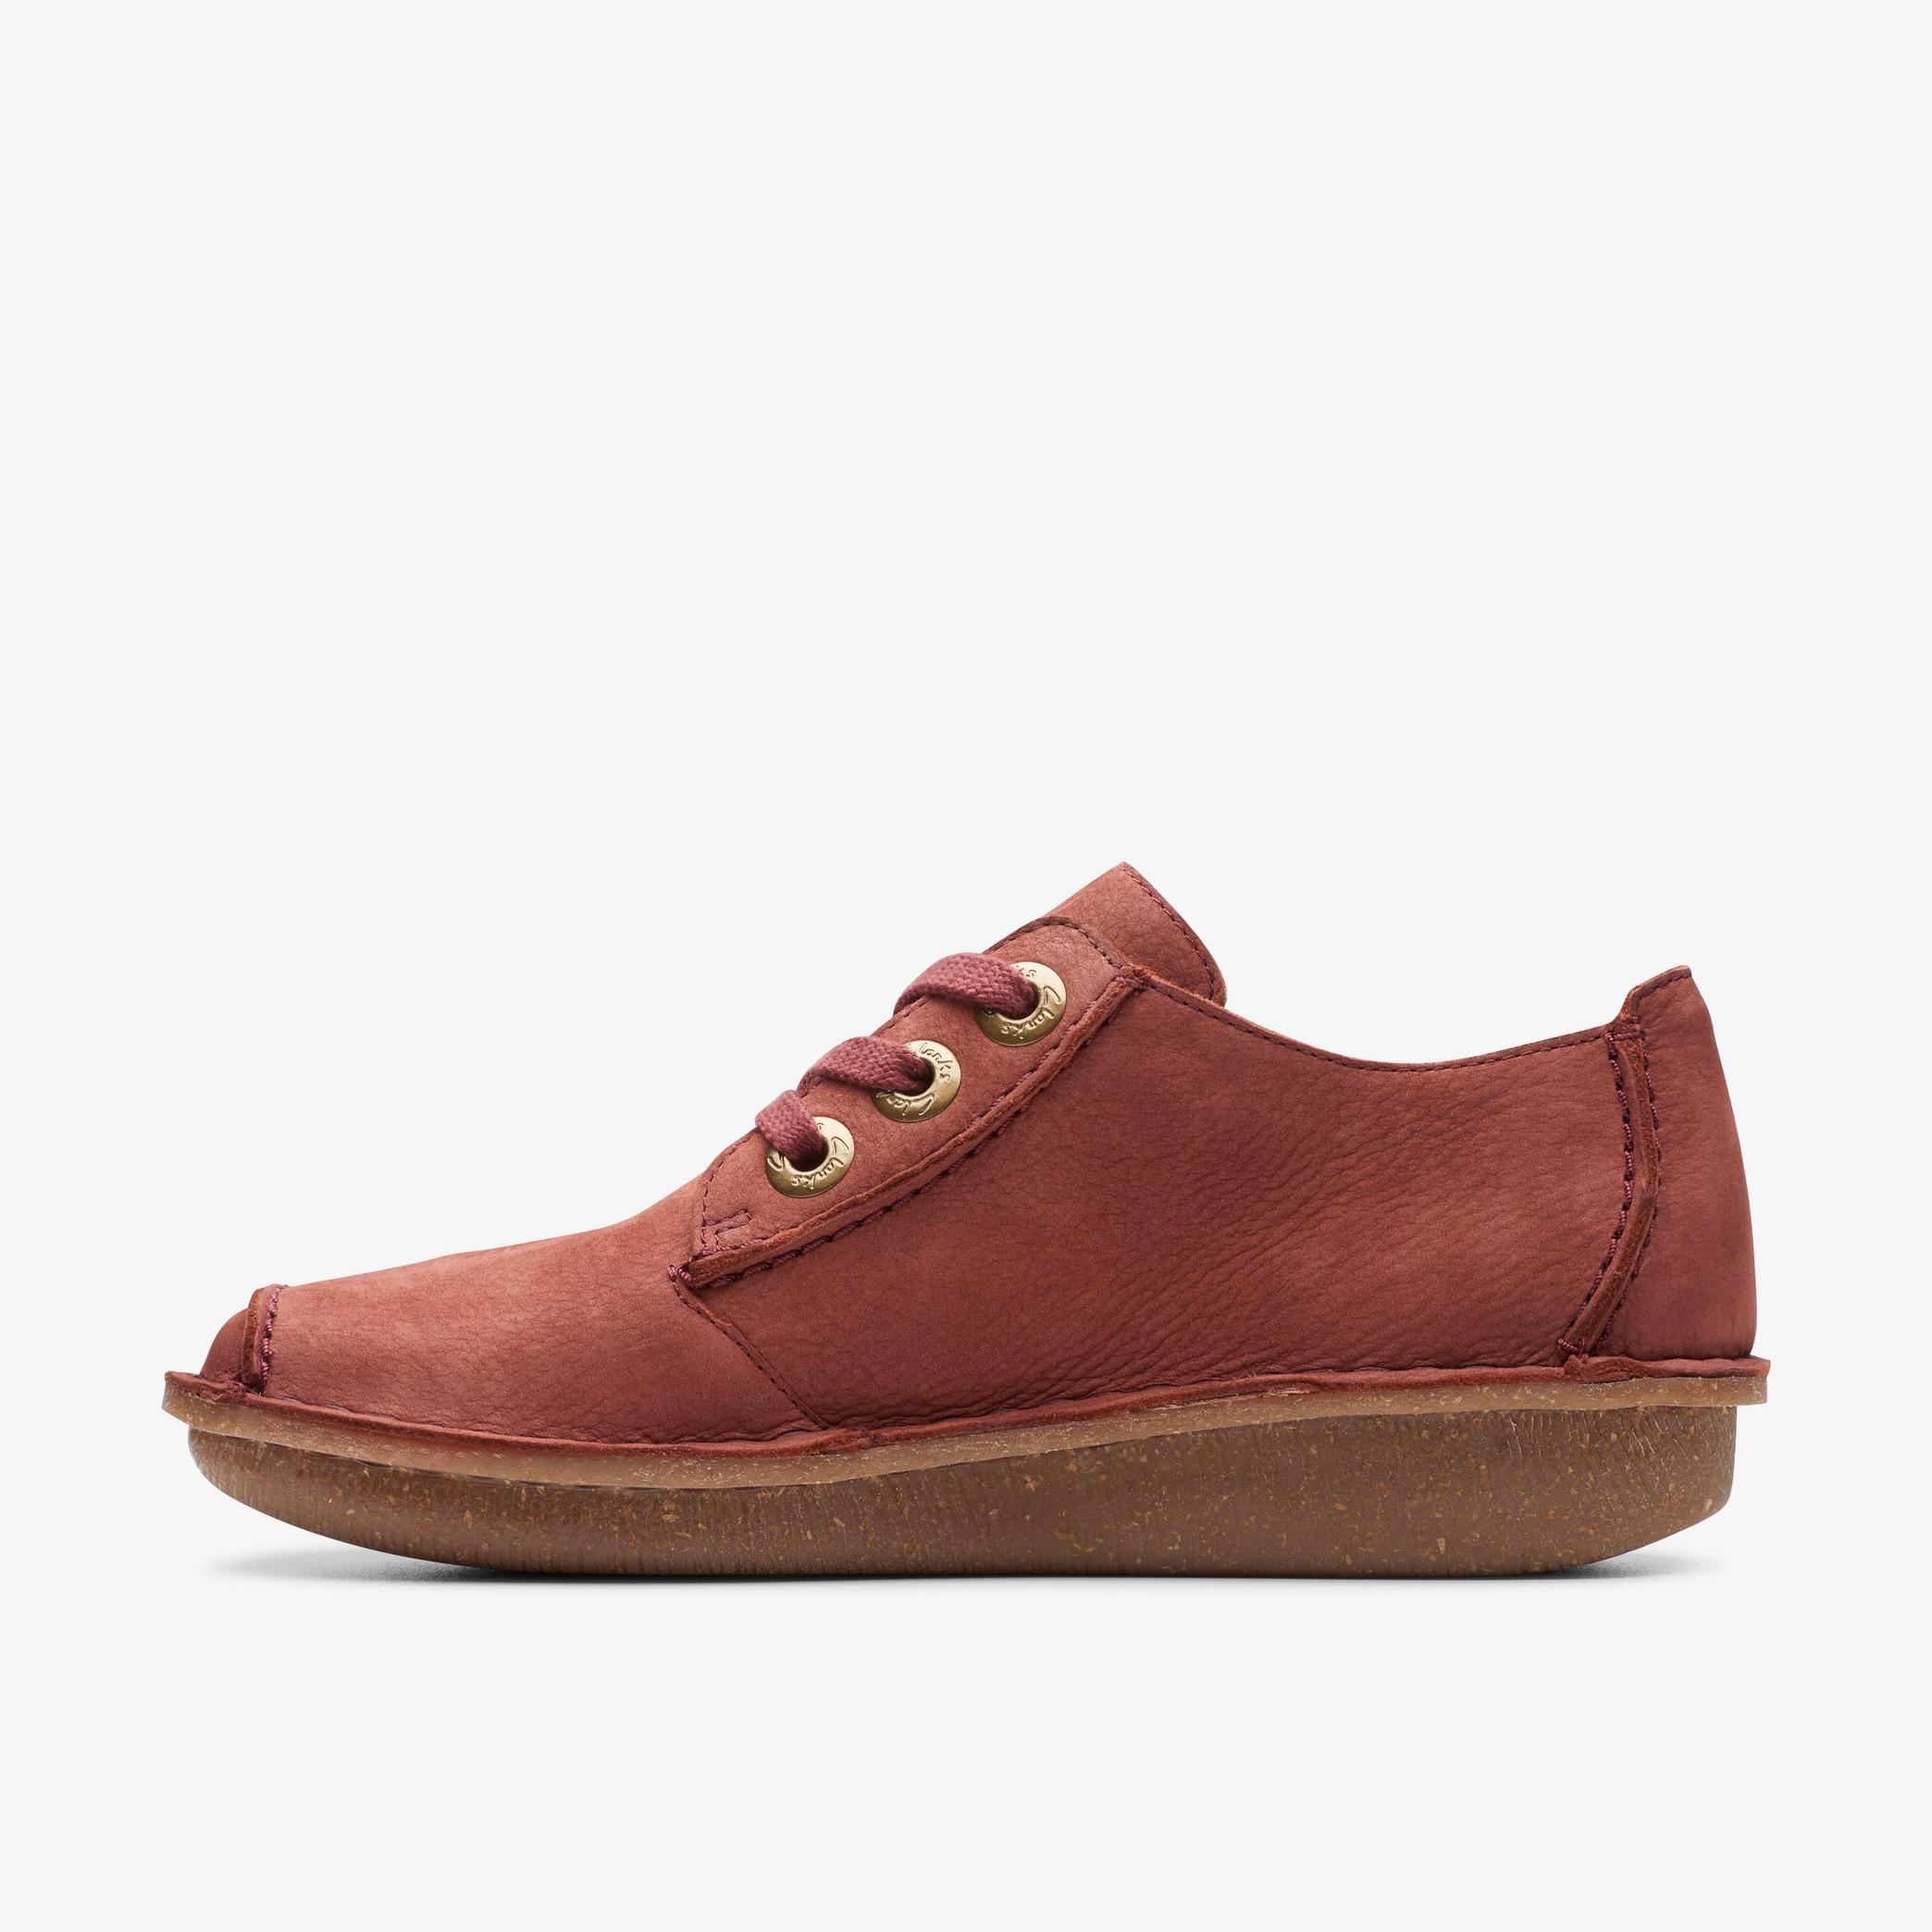 Funny Dream Chestnut Nubuck Derby Shoes, view 2 of 6